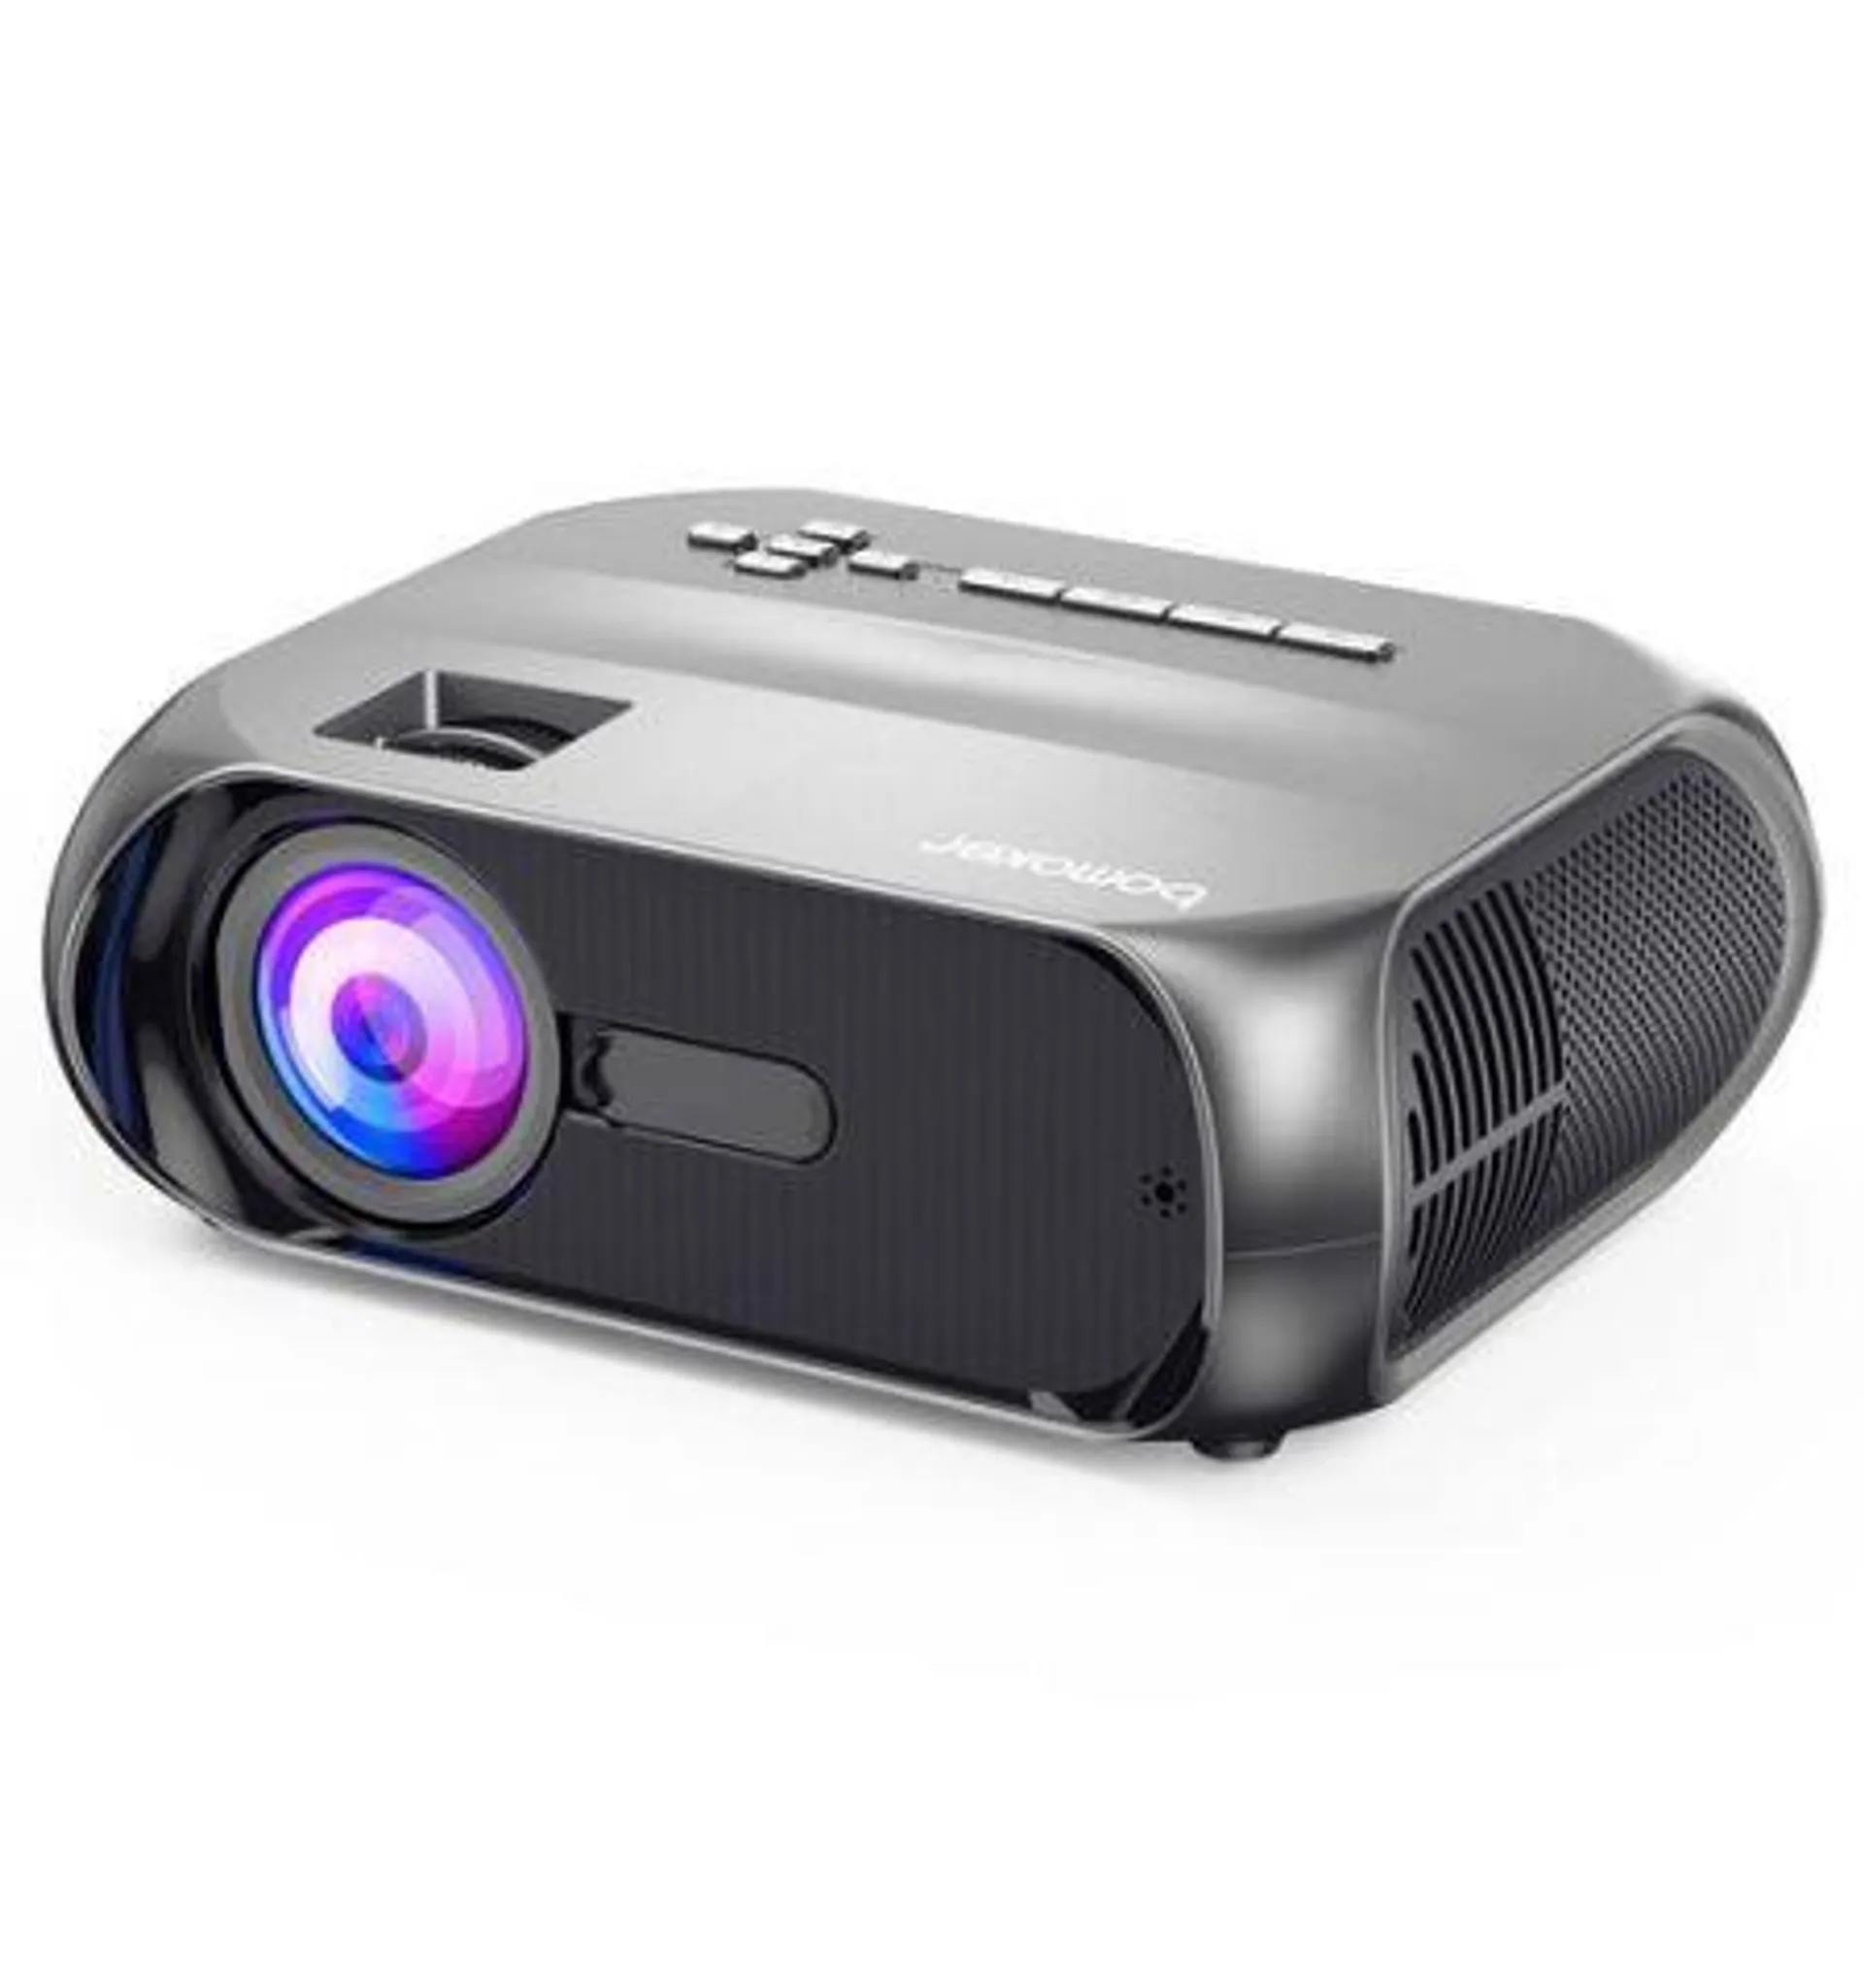 Bomaker S5 Home Theater Projector with Wifi